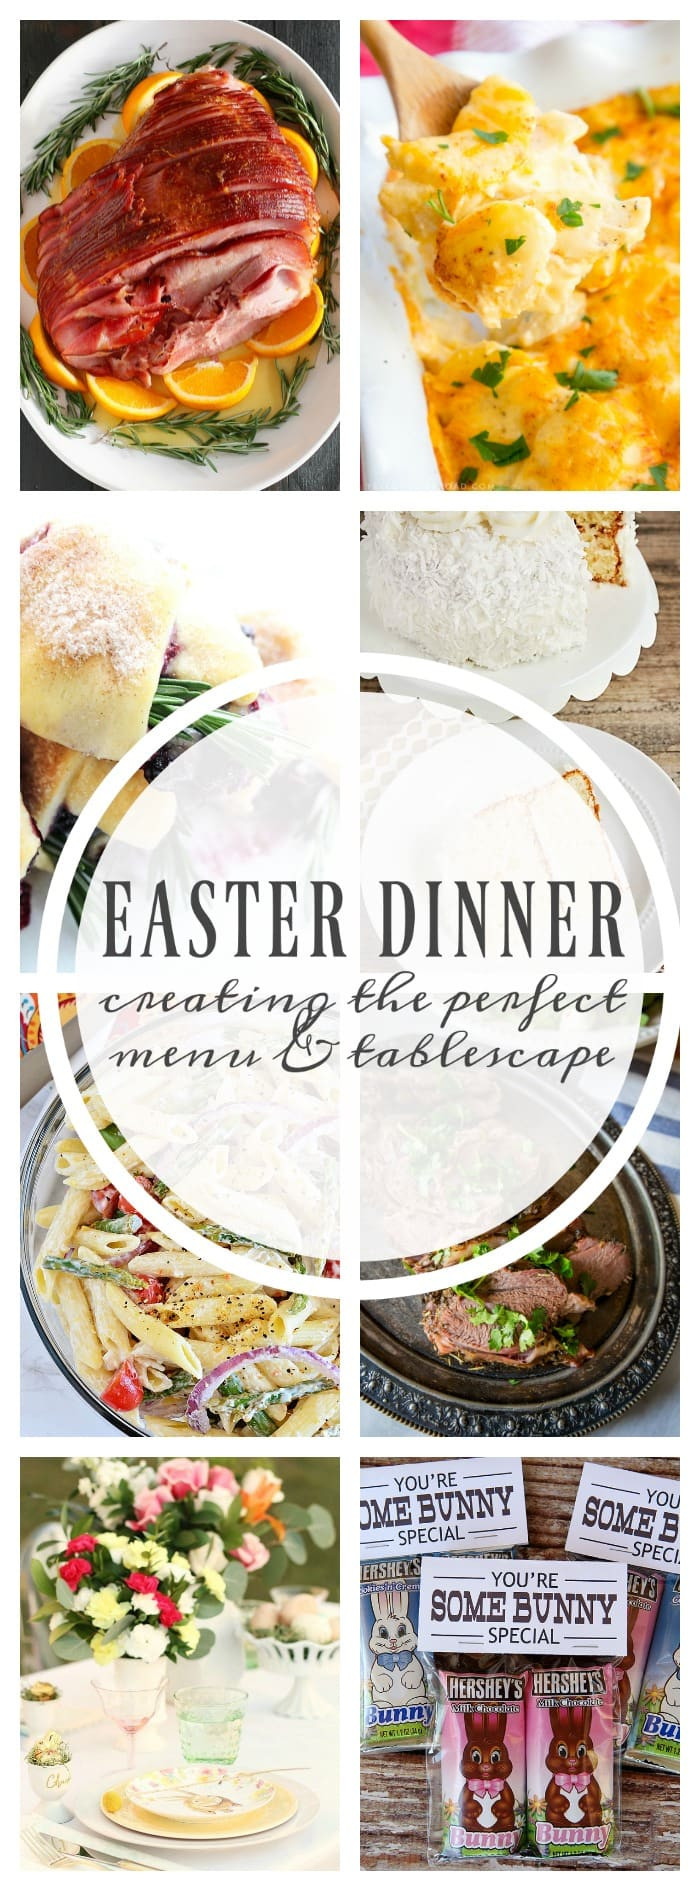 Easter Dinner Menue
 EASTER DINNER CREATING THE PERFECT MENU & TABLESCAPE A